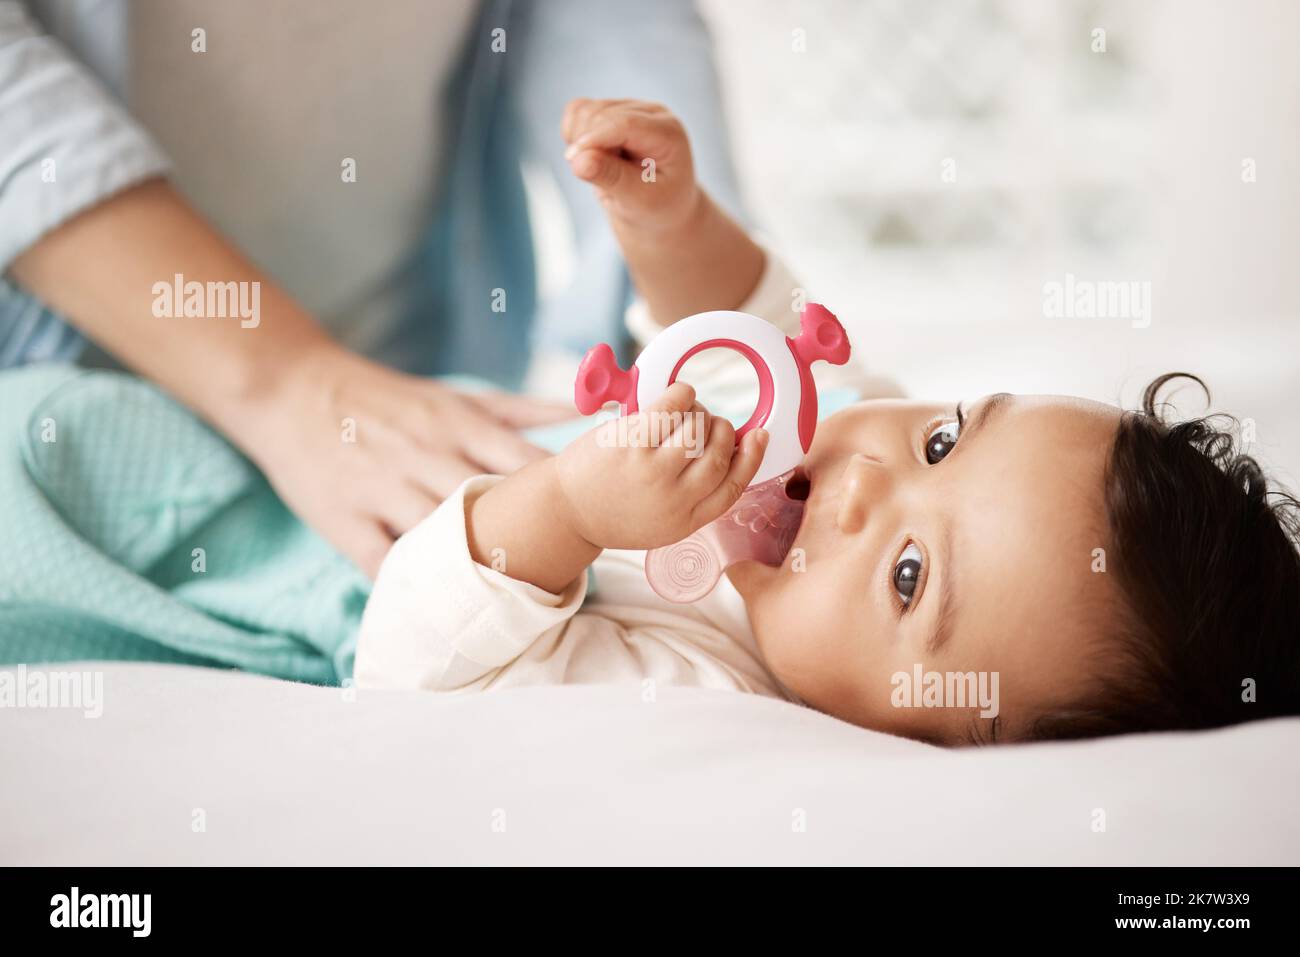 Her teether is the only thing that keeps her calm. an adorable little girl playing with a teething toy. Stock Photo